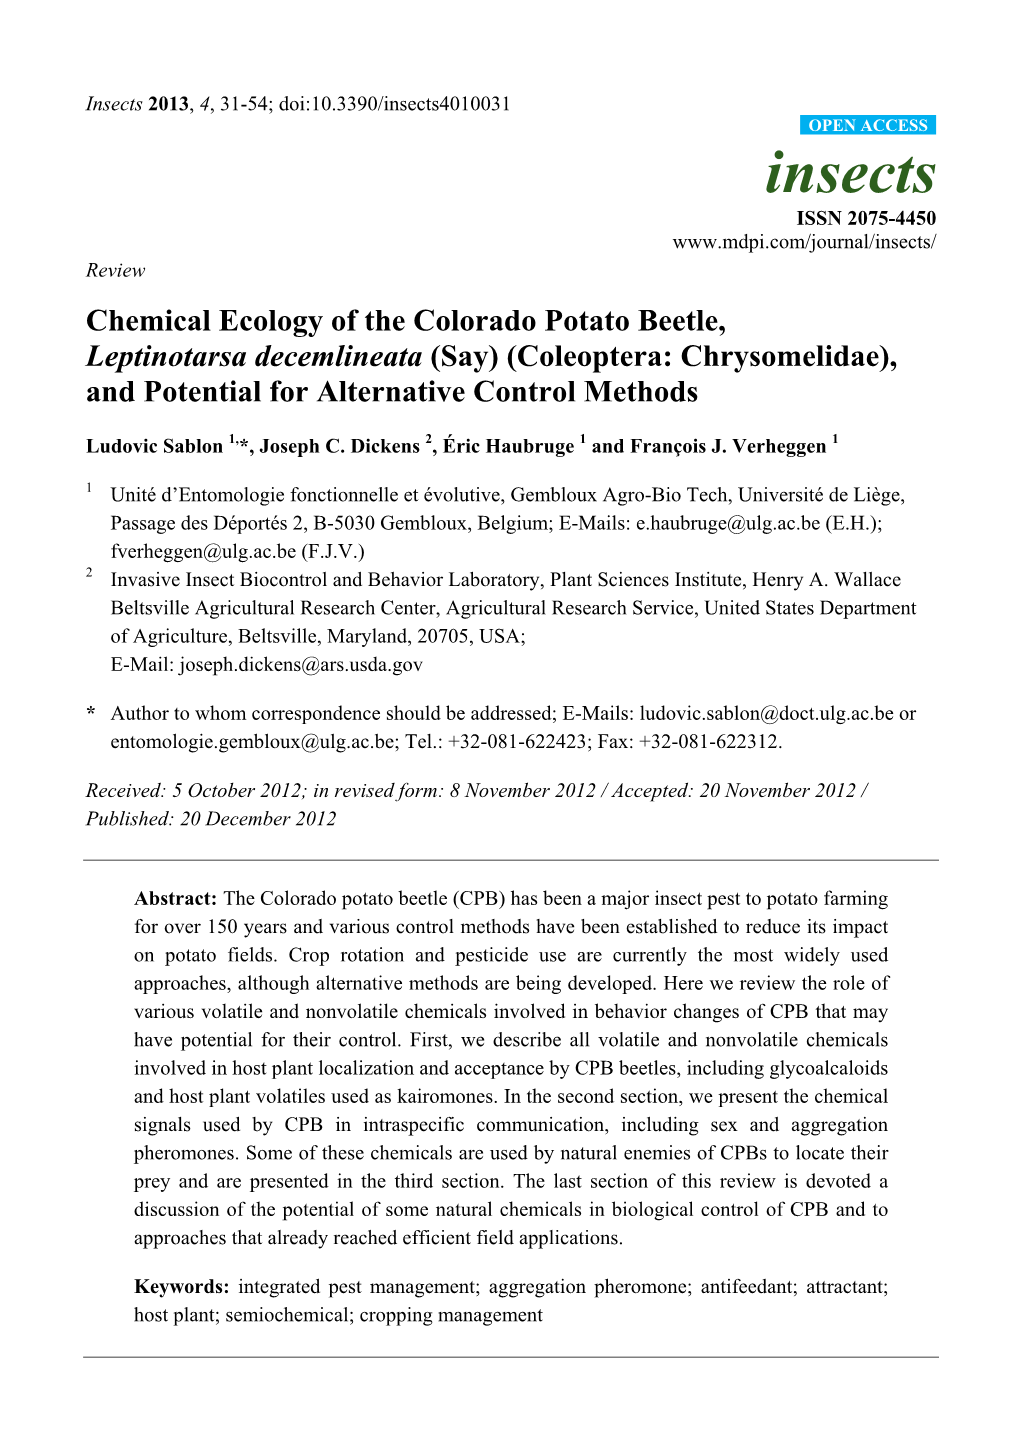 Chemical Ecology of the Colorado Potato Beetle, Leptinotarsa Decemlineata (Say) (Coleoptera: Chrysomelidae), and Potential for Alternative Control Methods